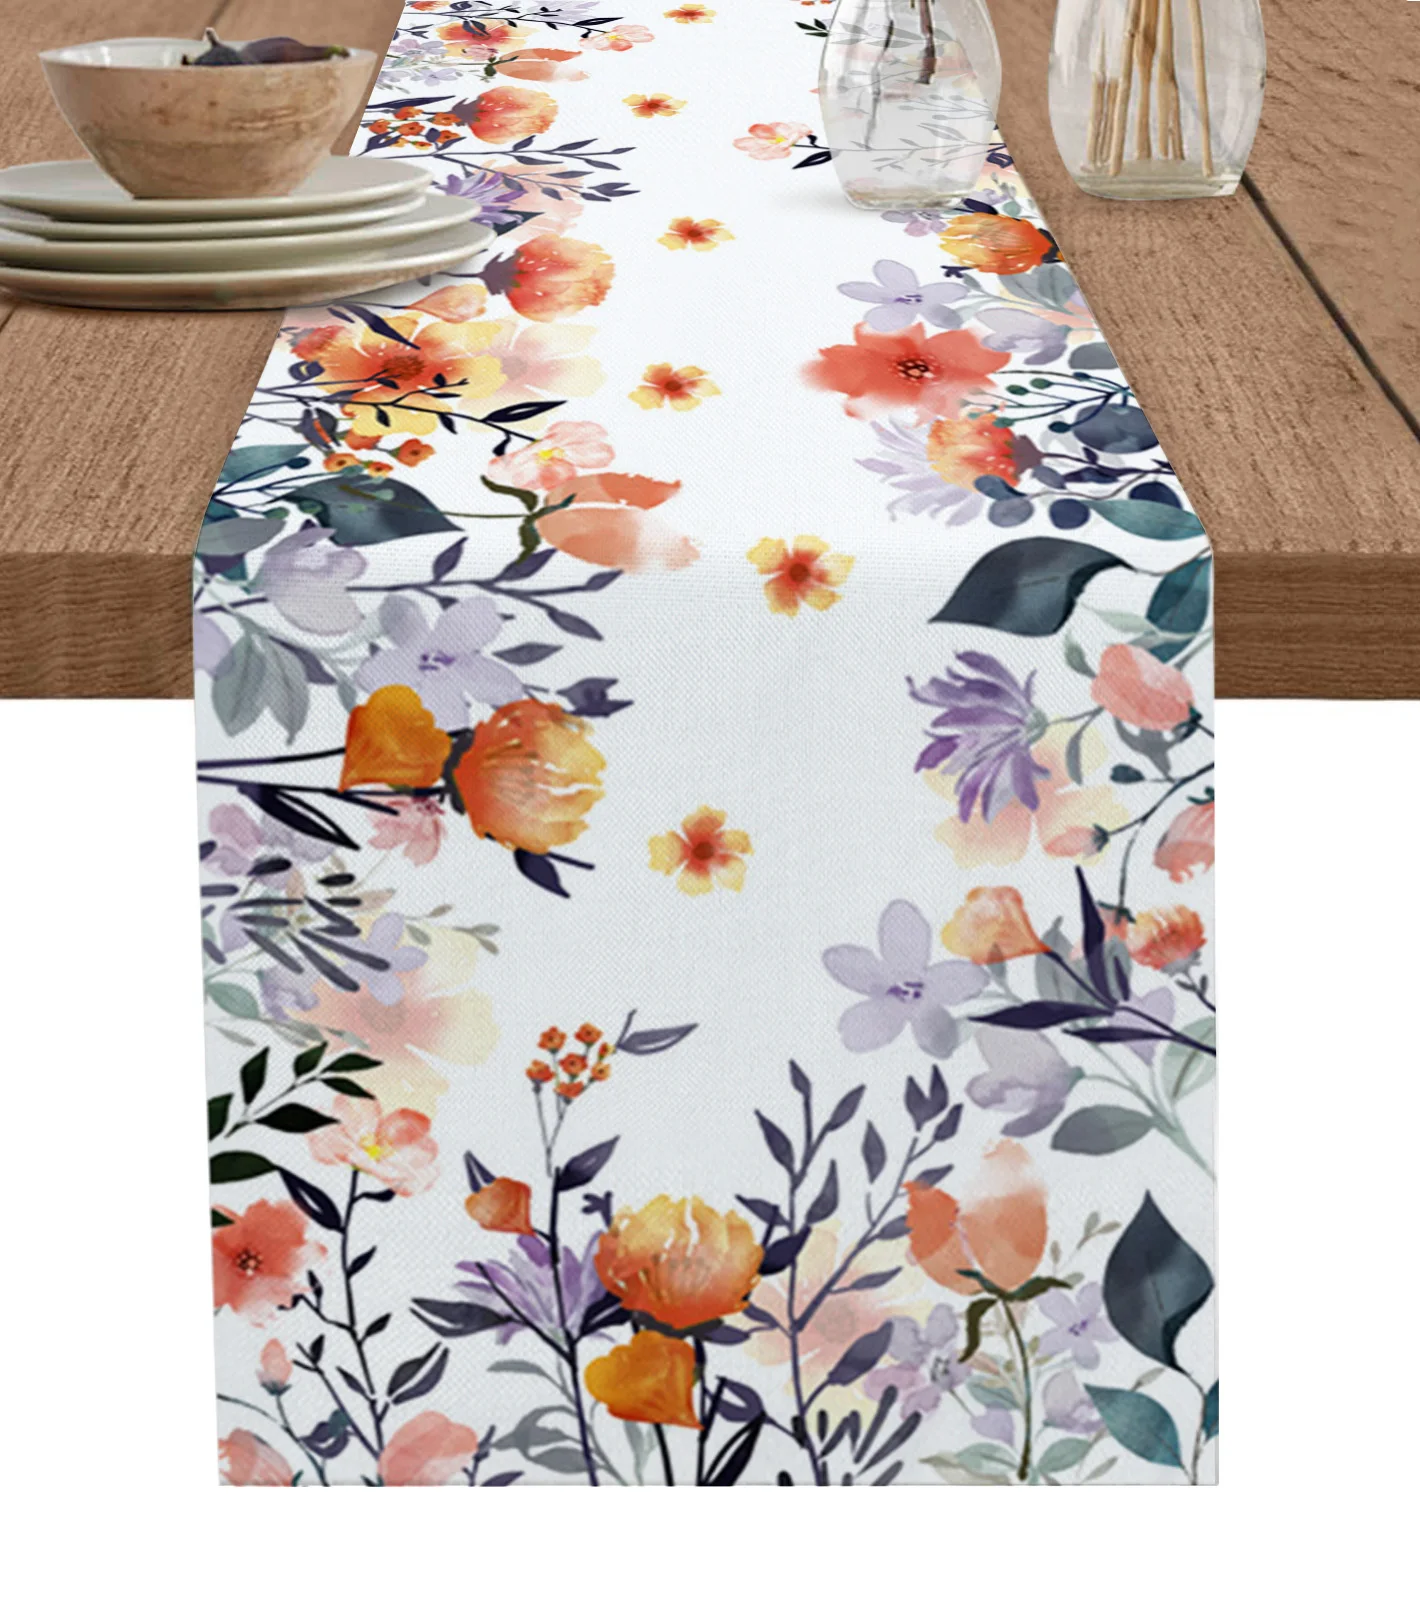 

Plant And Flower Hand-Painted Watercolor Orange Table Runner Decoration Home Decor Dinner Table Decoration Table Decor